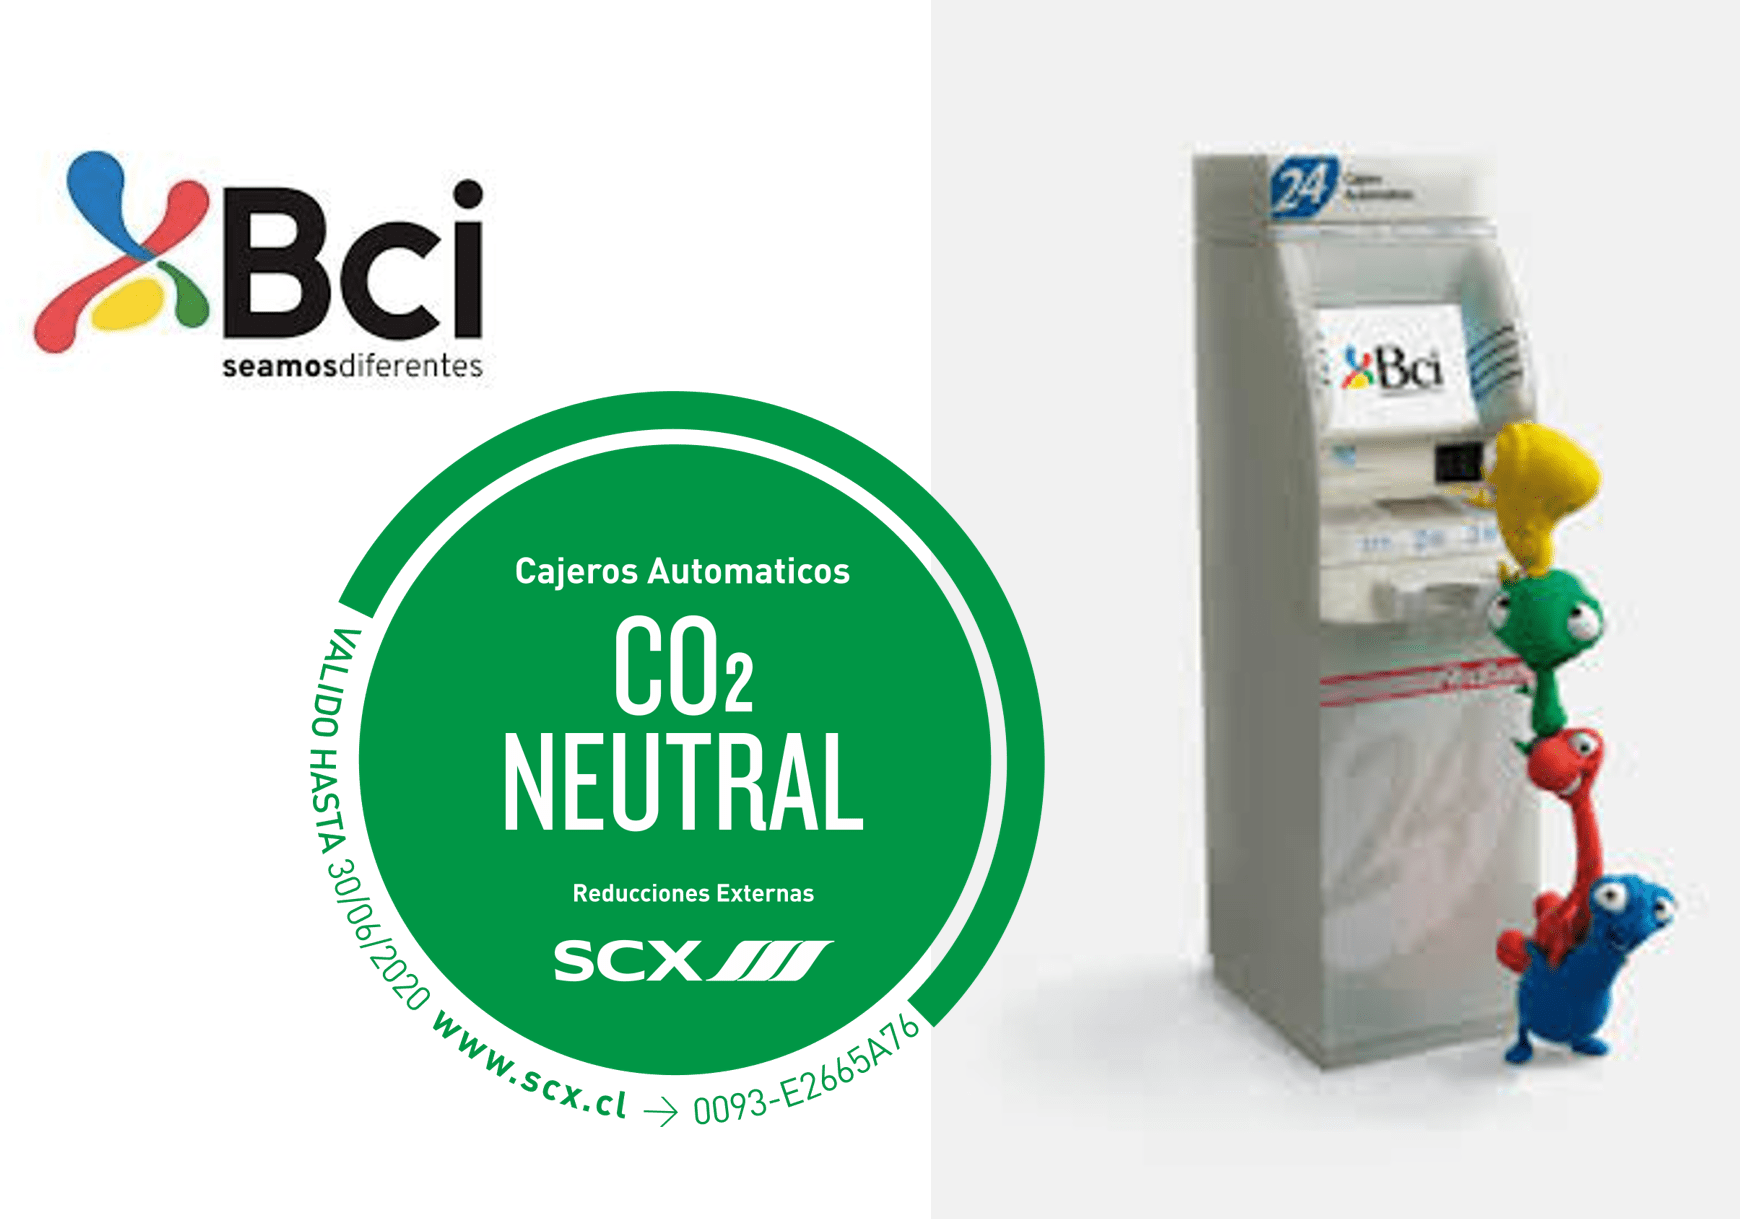 BCI, ATMs are carbon neutral